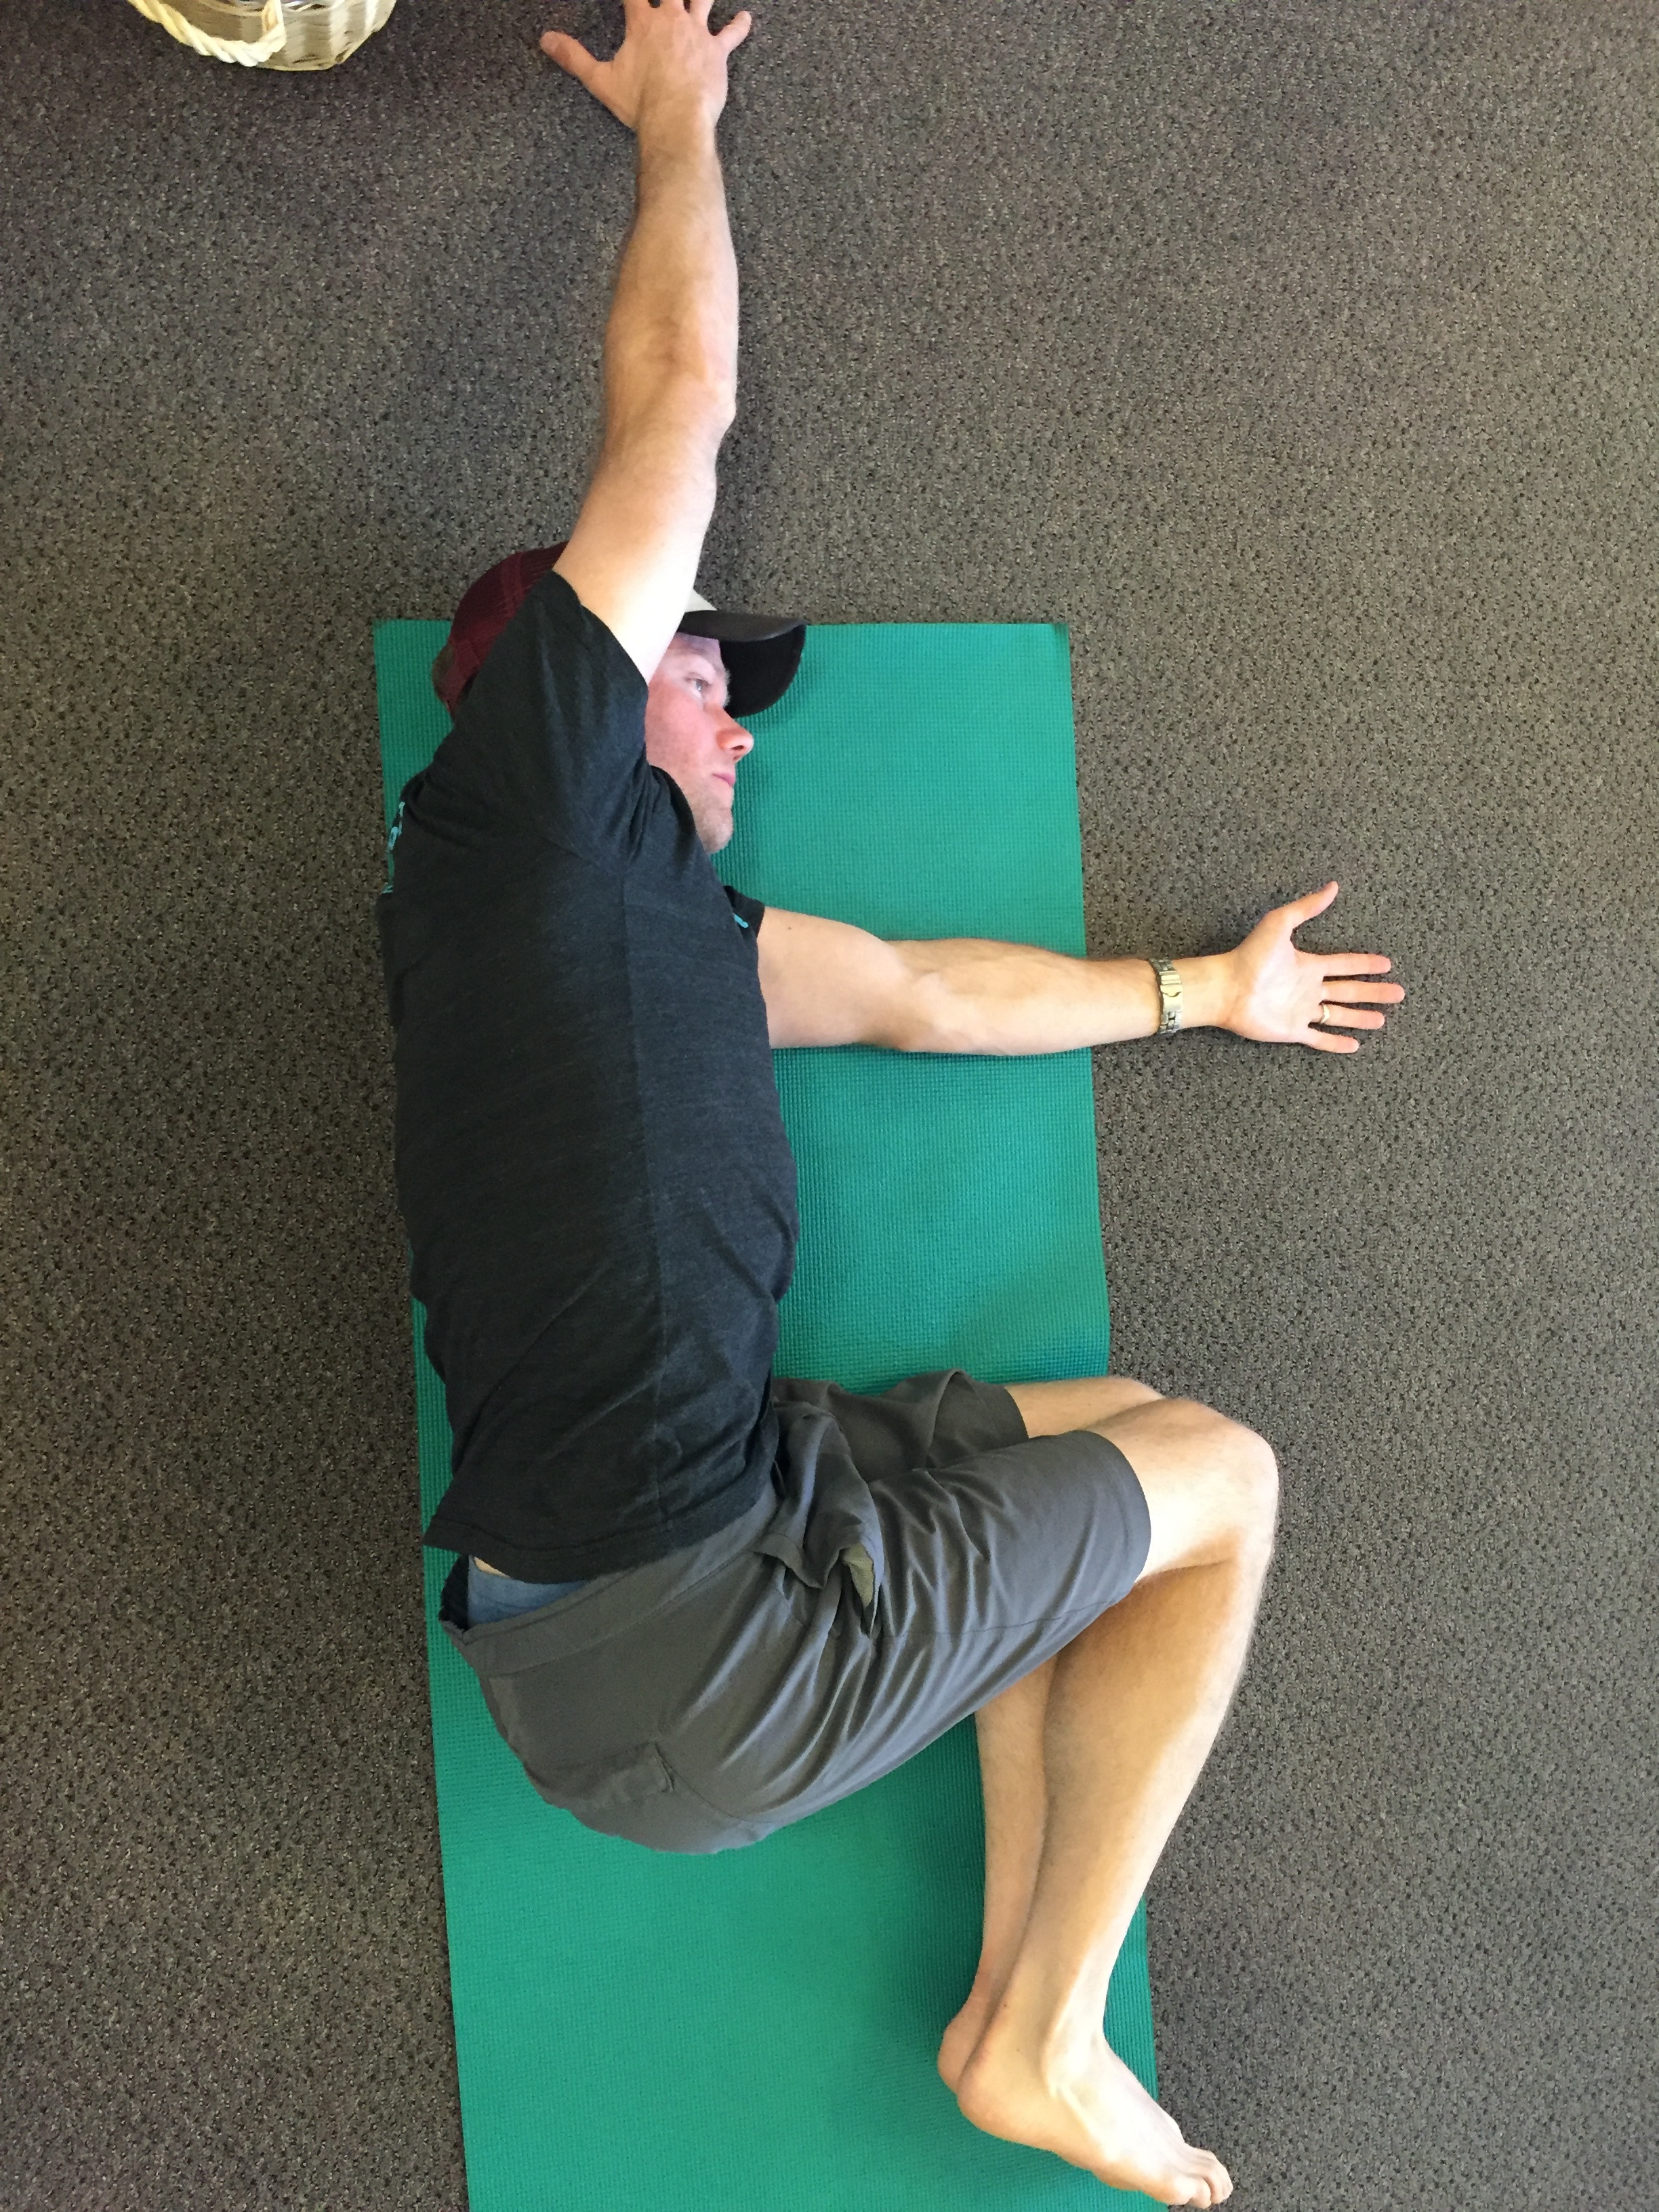 shoulder-exercise-mobility-thoracic spine